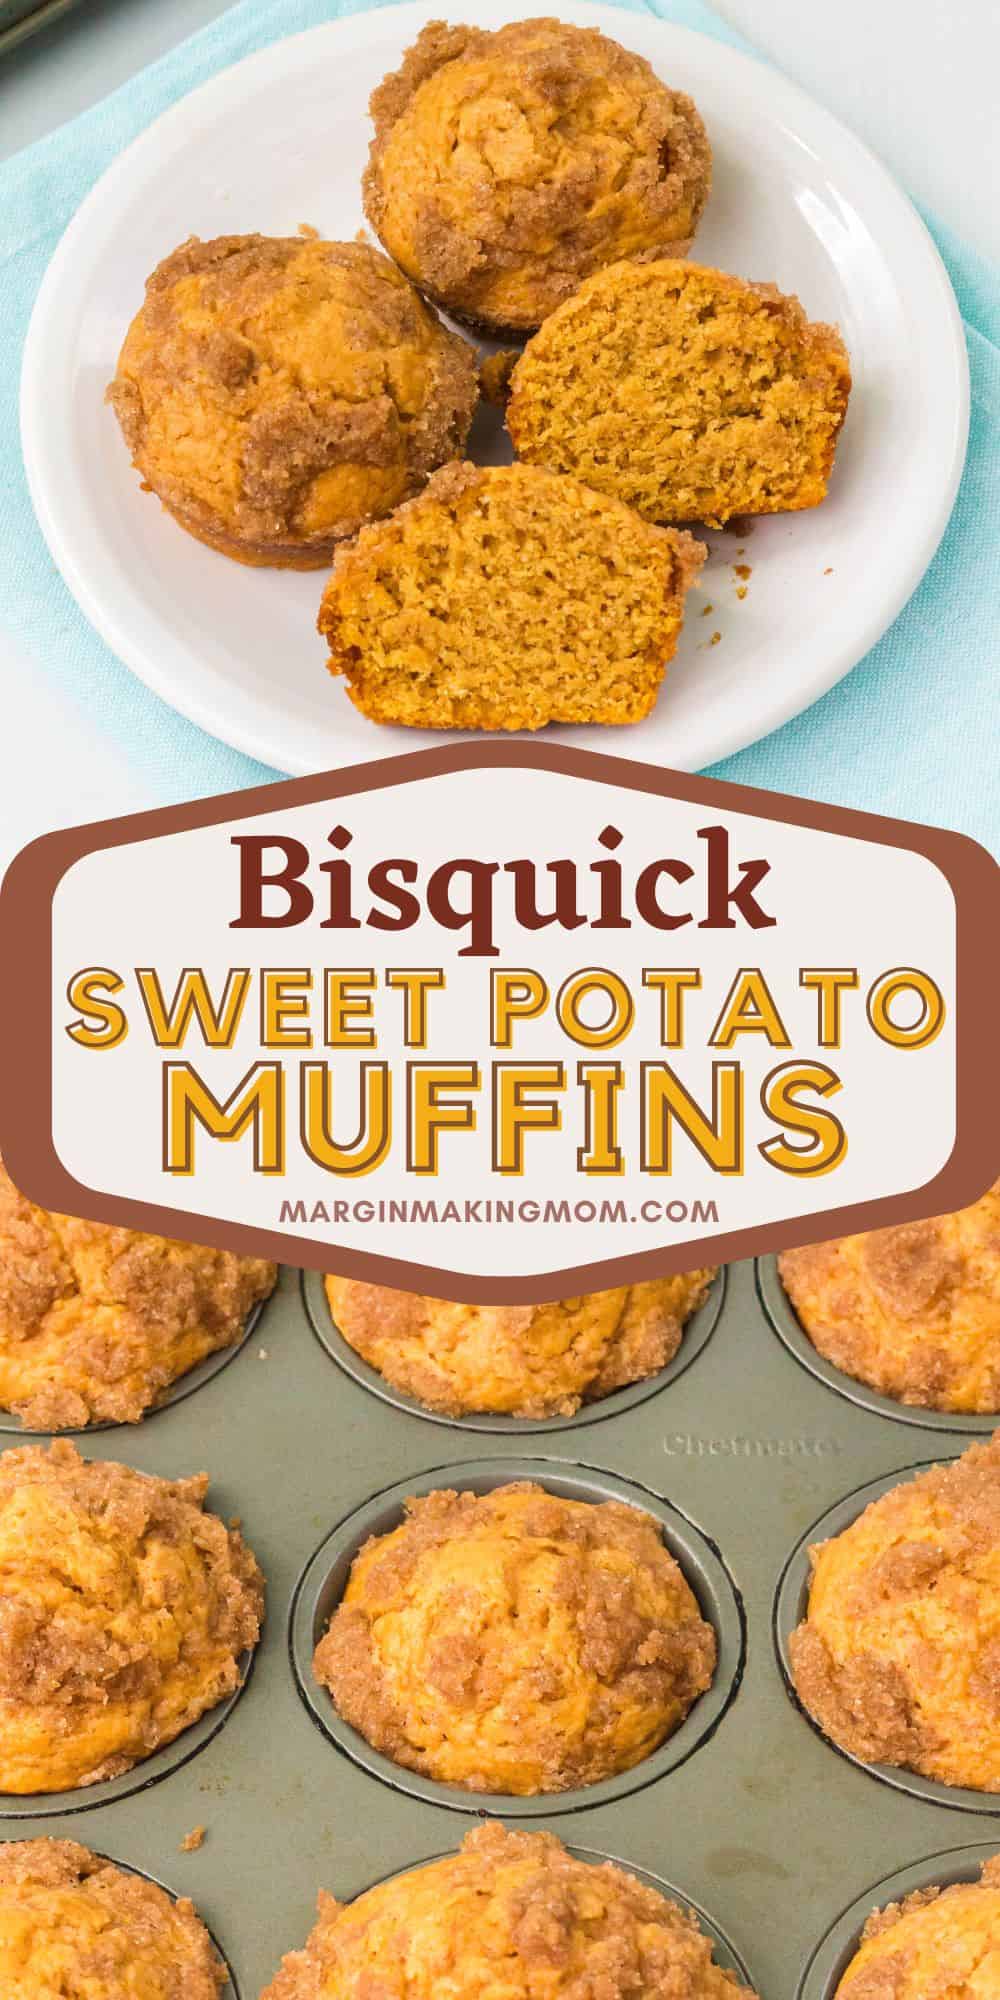 two photos; one shows Bisquick sweet potato muffins served on a white plate, the other shows the muffins in a muffin tin after baking